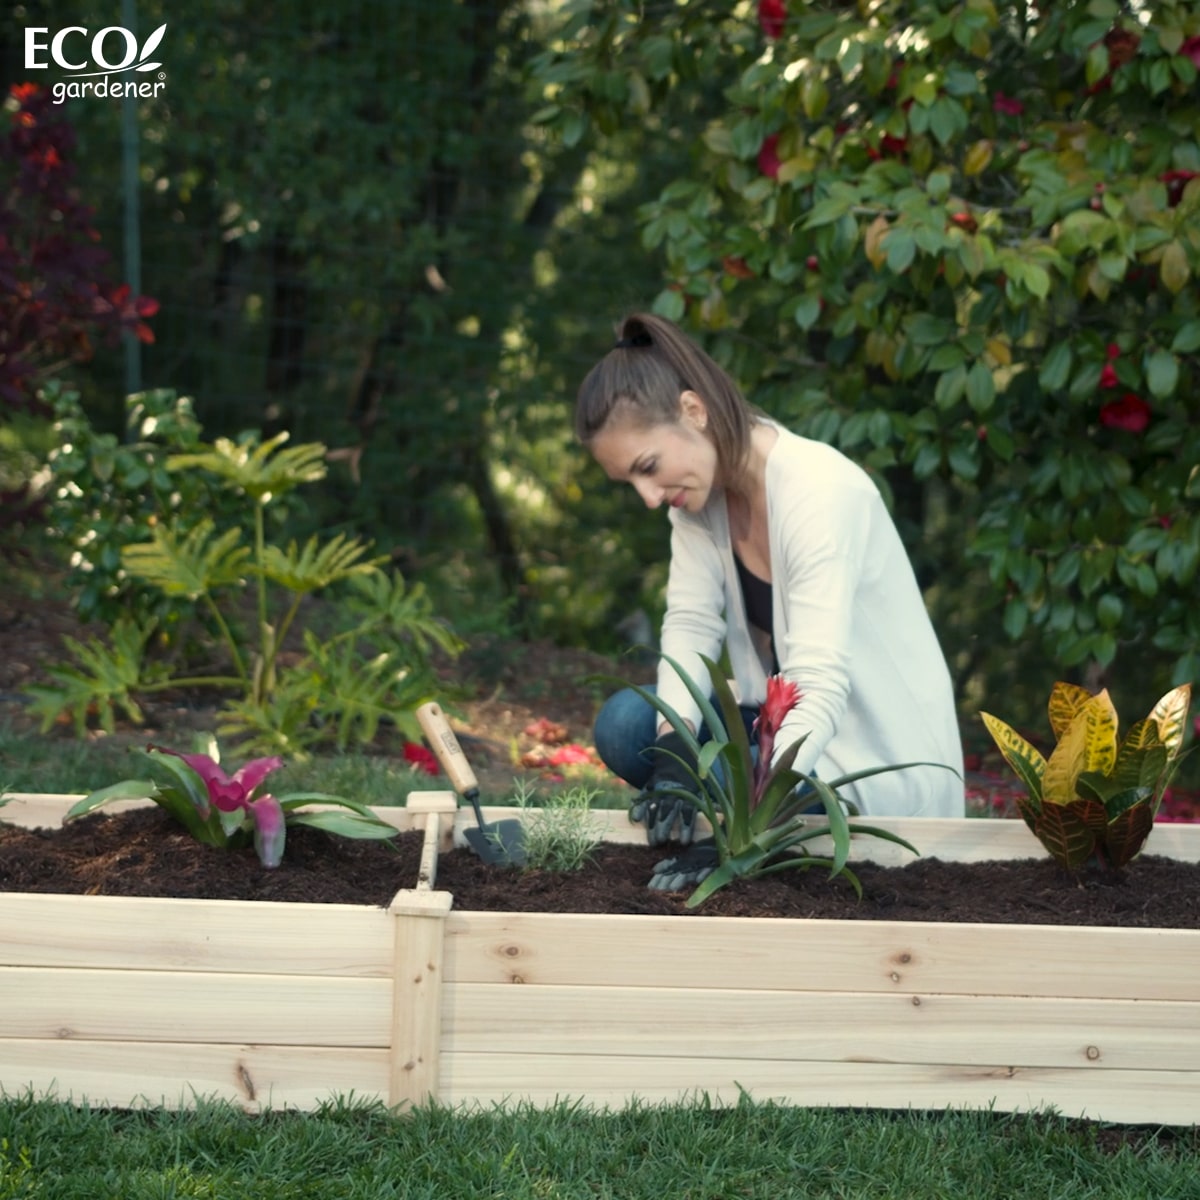 A woman planting in an Ecogardener Raised Bed.